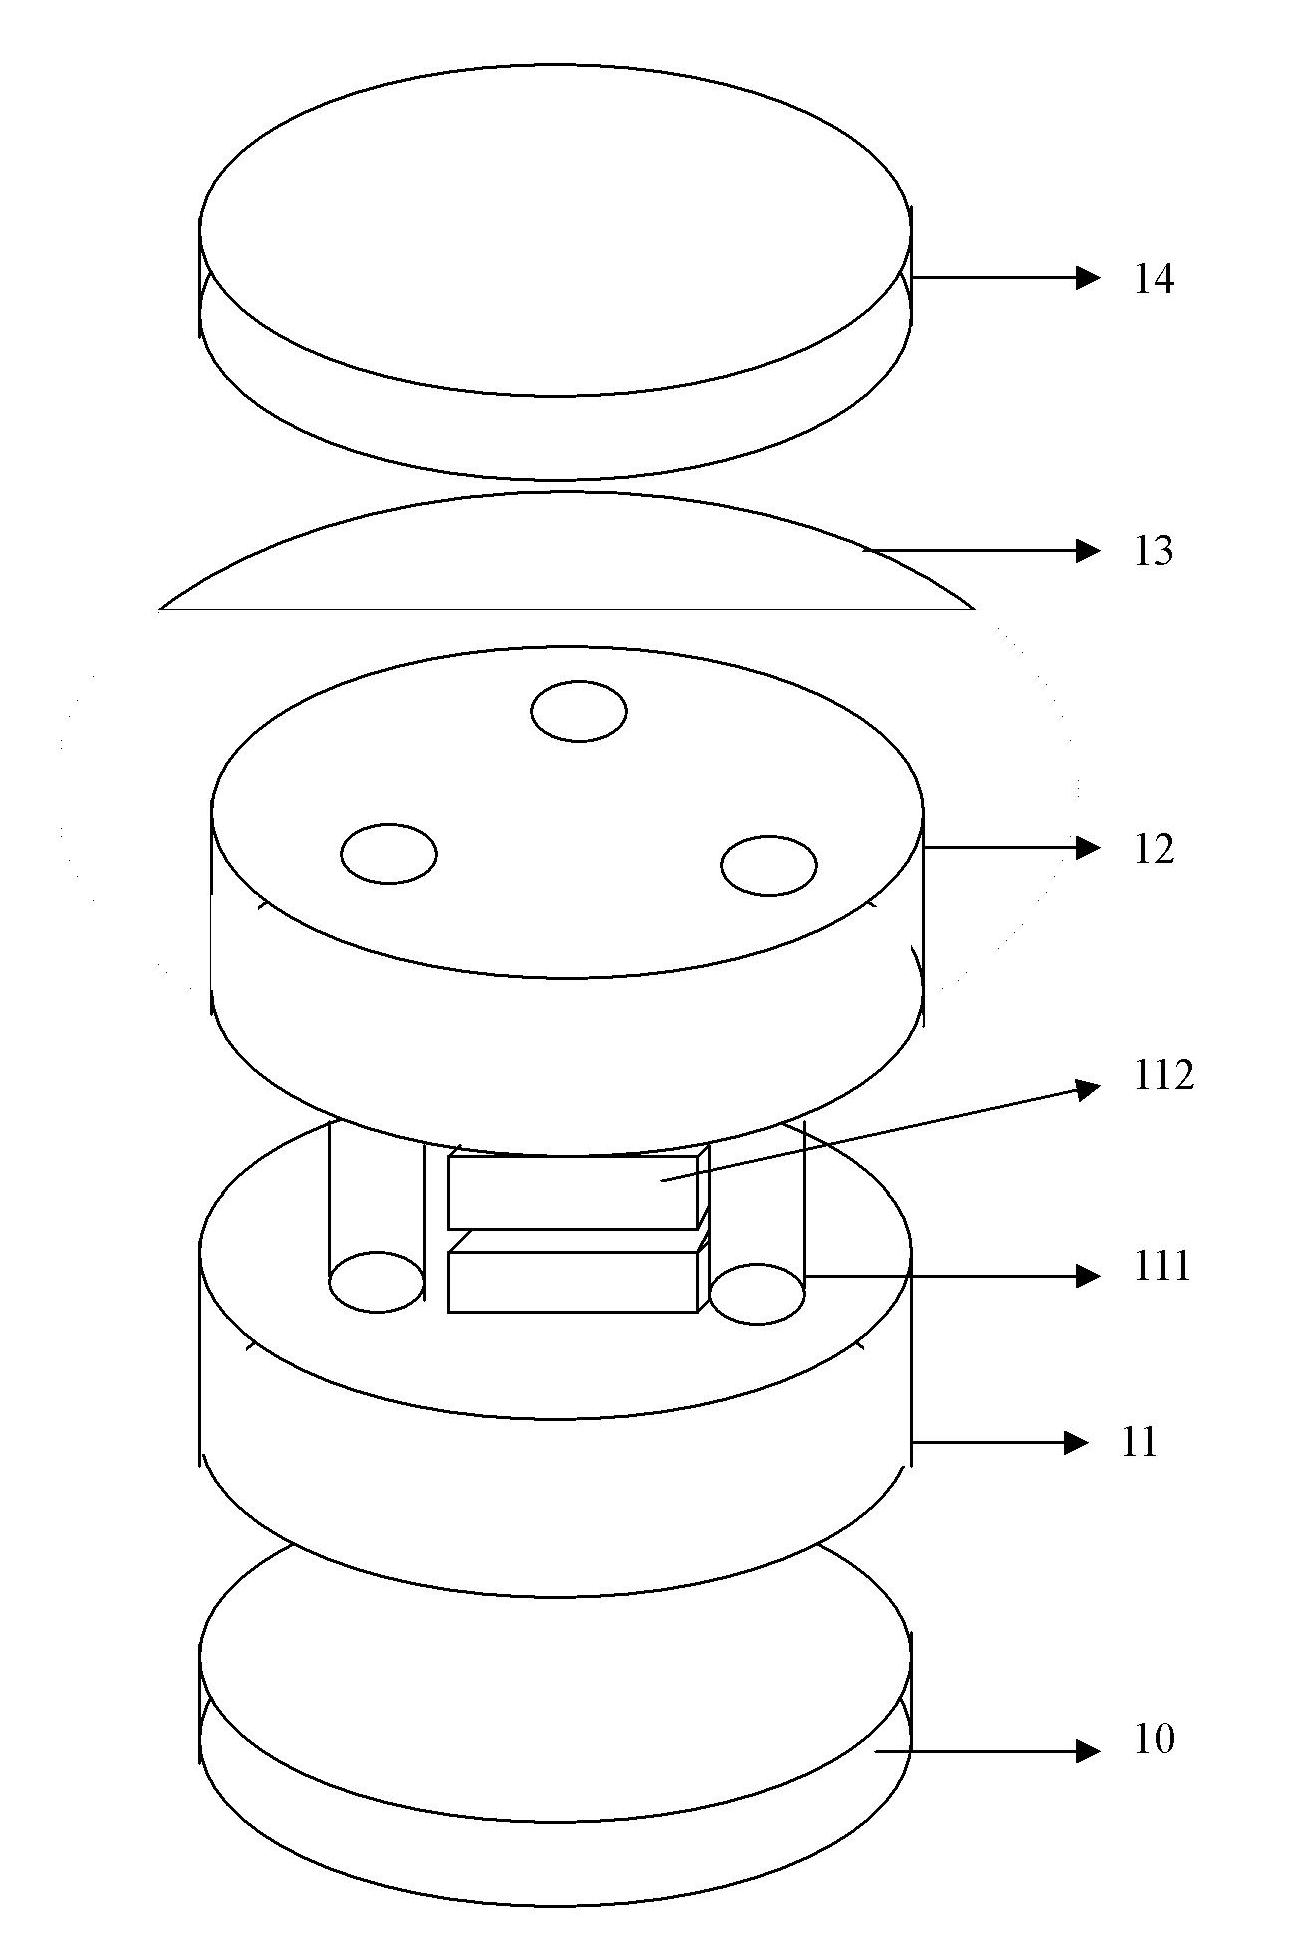 Uniform axial force applying device for graphical heterogeneous bonding of silicon-based III-V epitaxial material